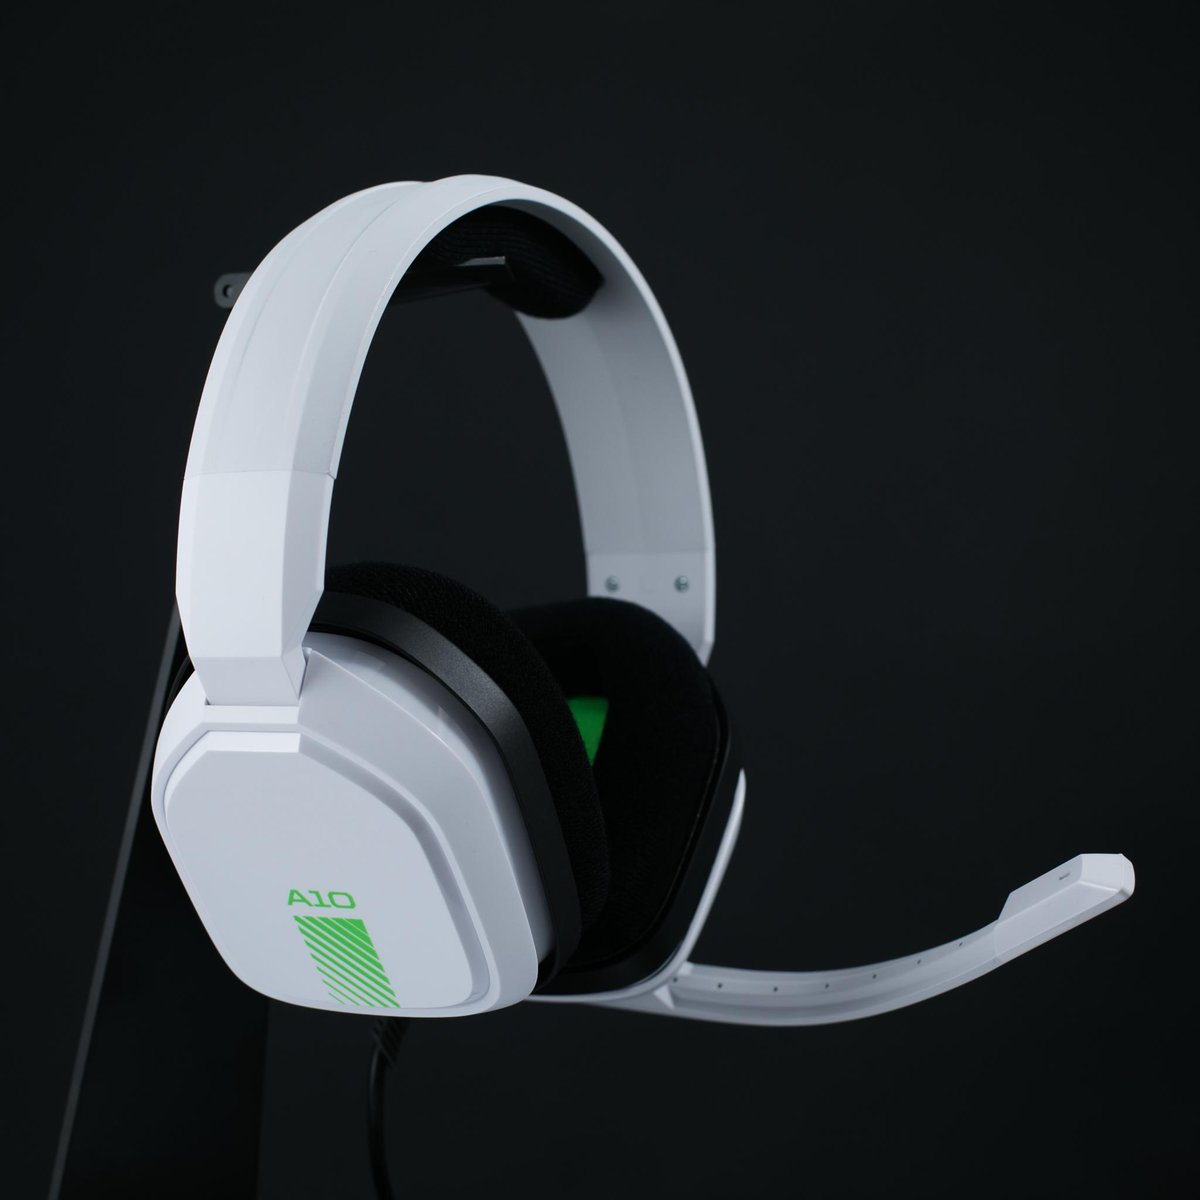 Astro Gaming Built For All Day All Night Gaming A10 Headset T Co Hxd3ehle54